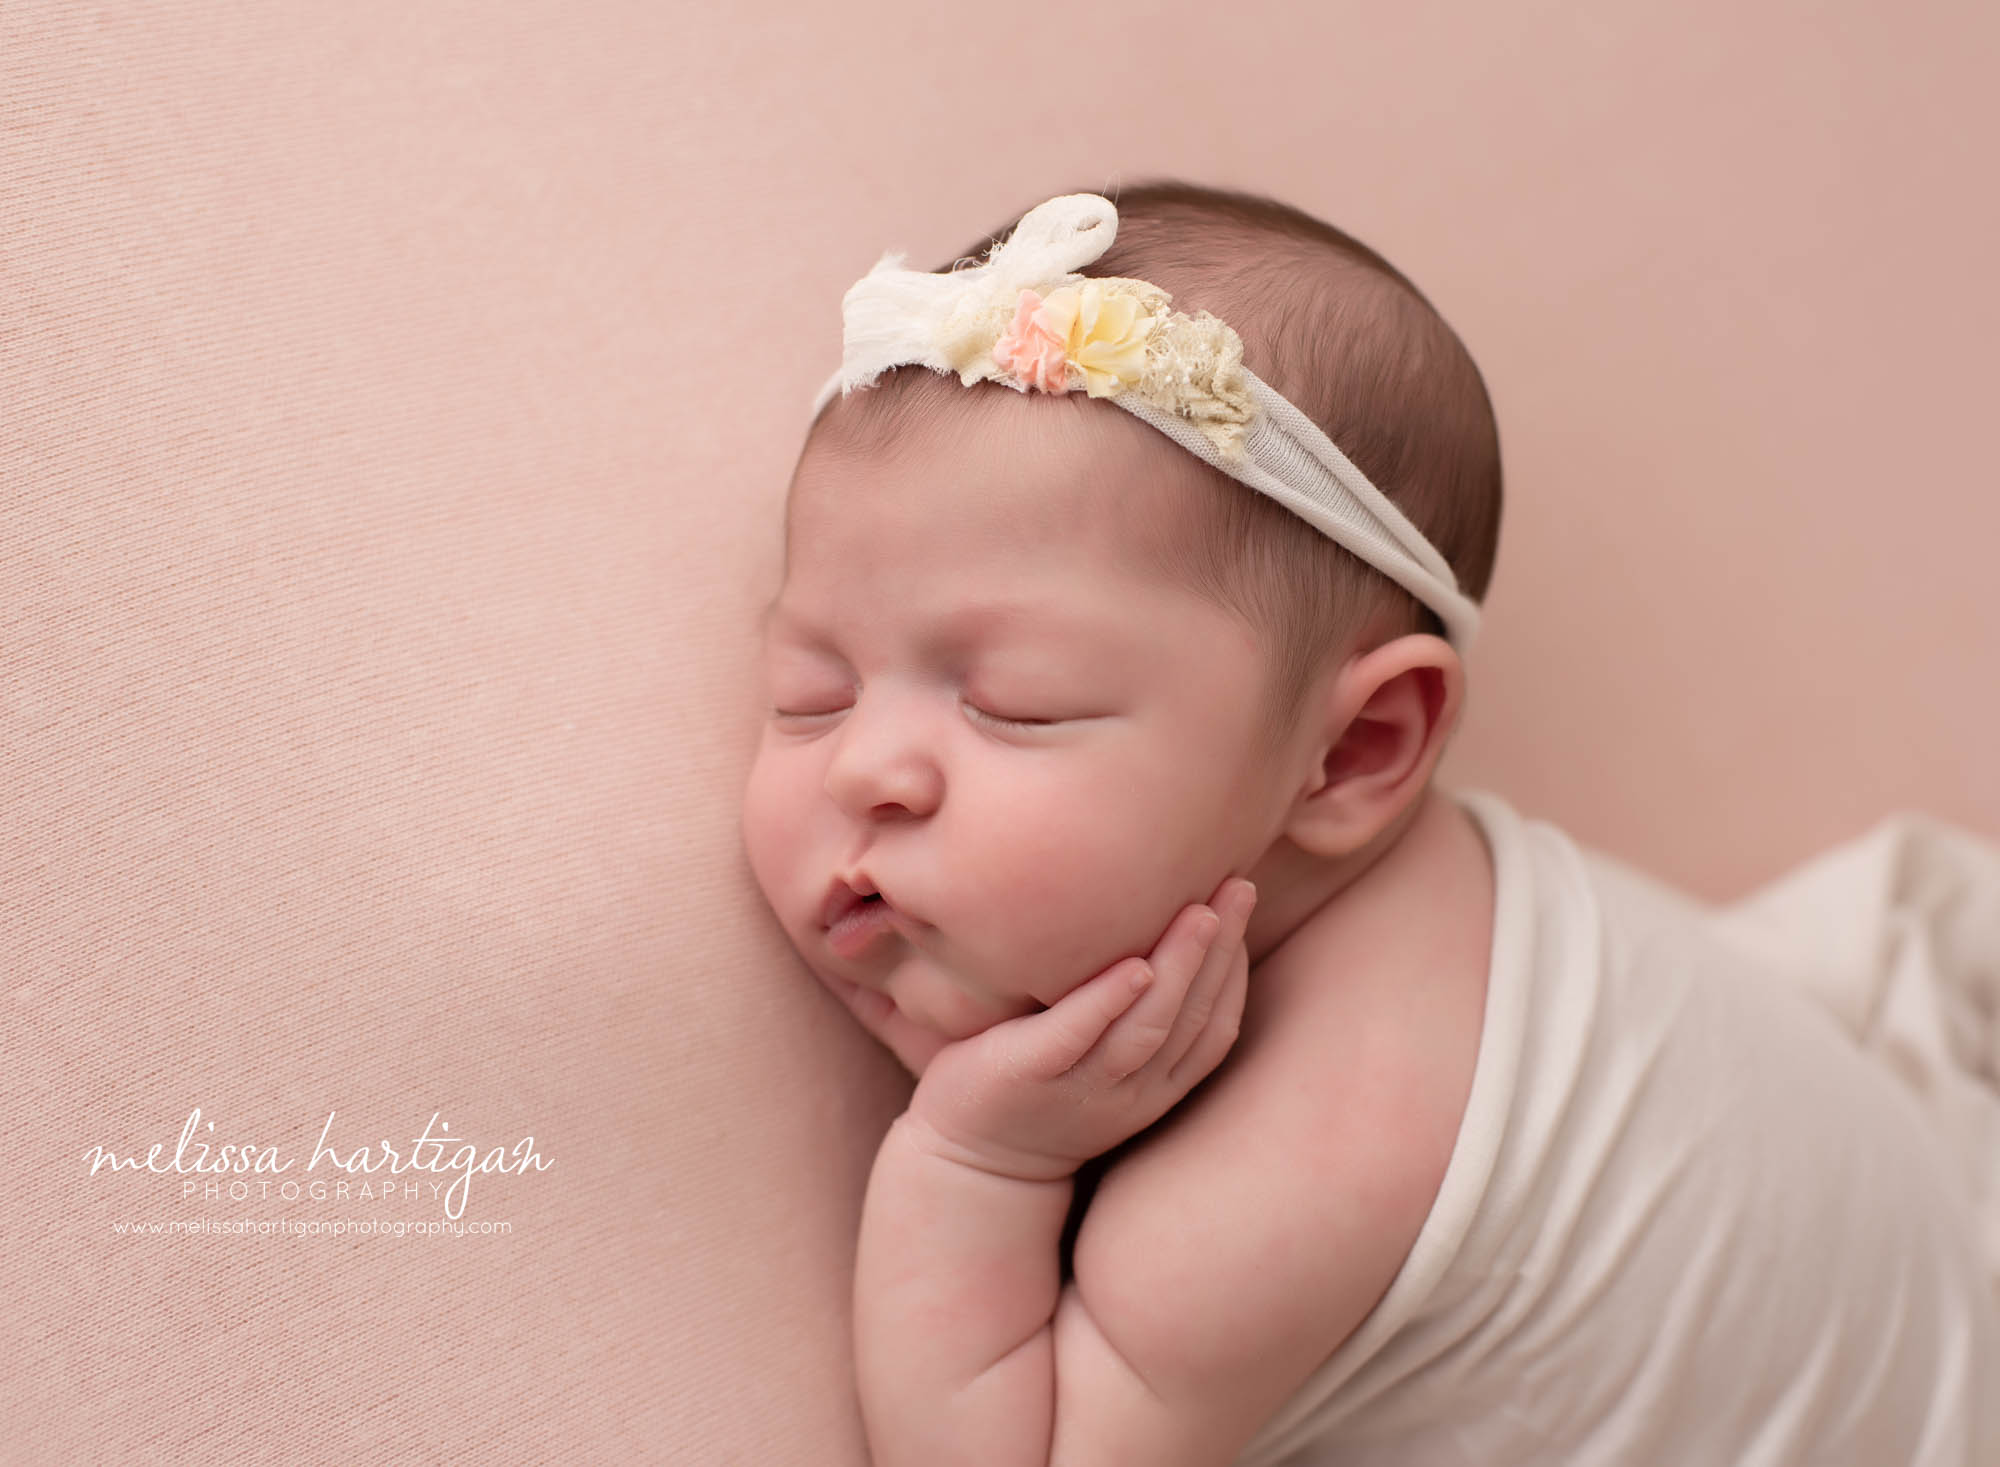 baby girl posed on side with hands on cheeks